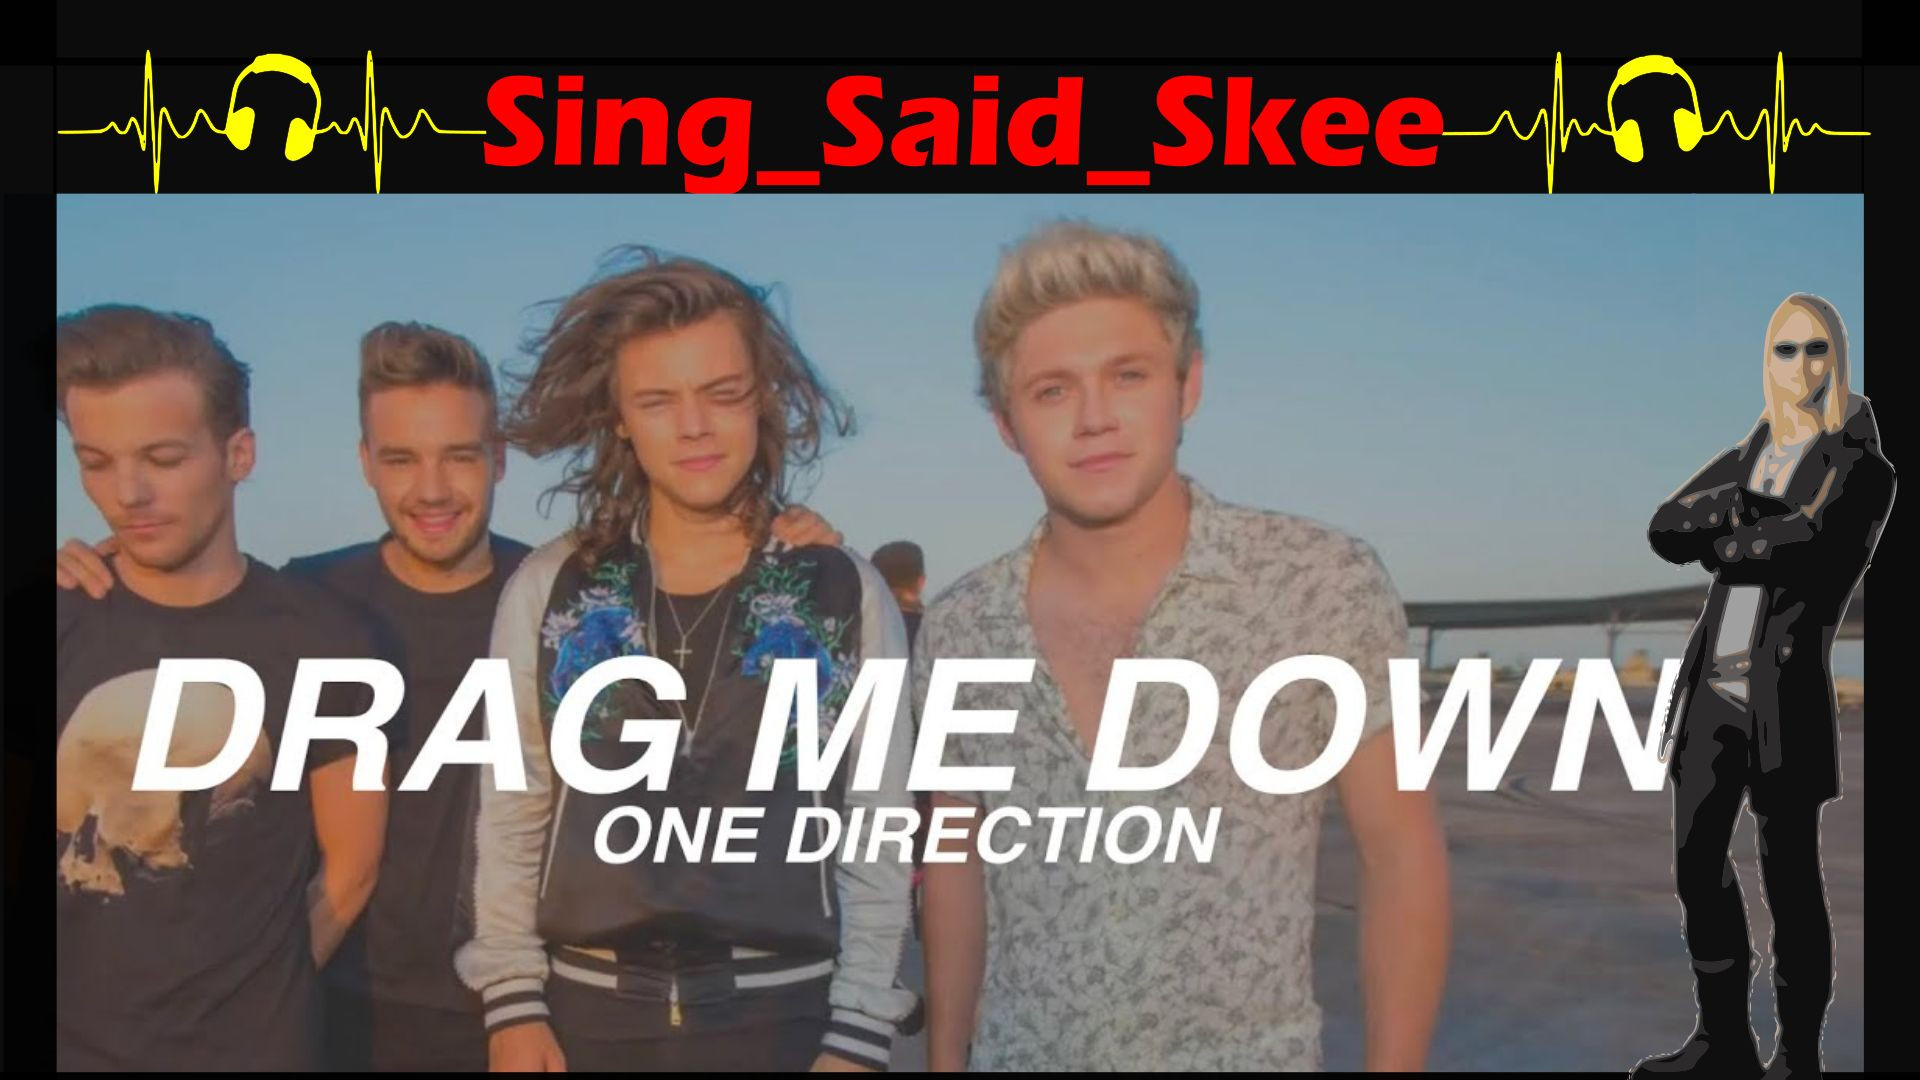 Drag Me Down - One Direction - Sing_Said_Skee